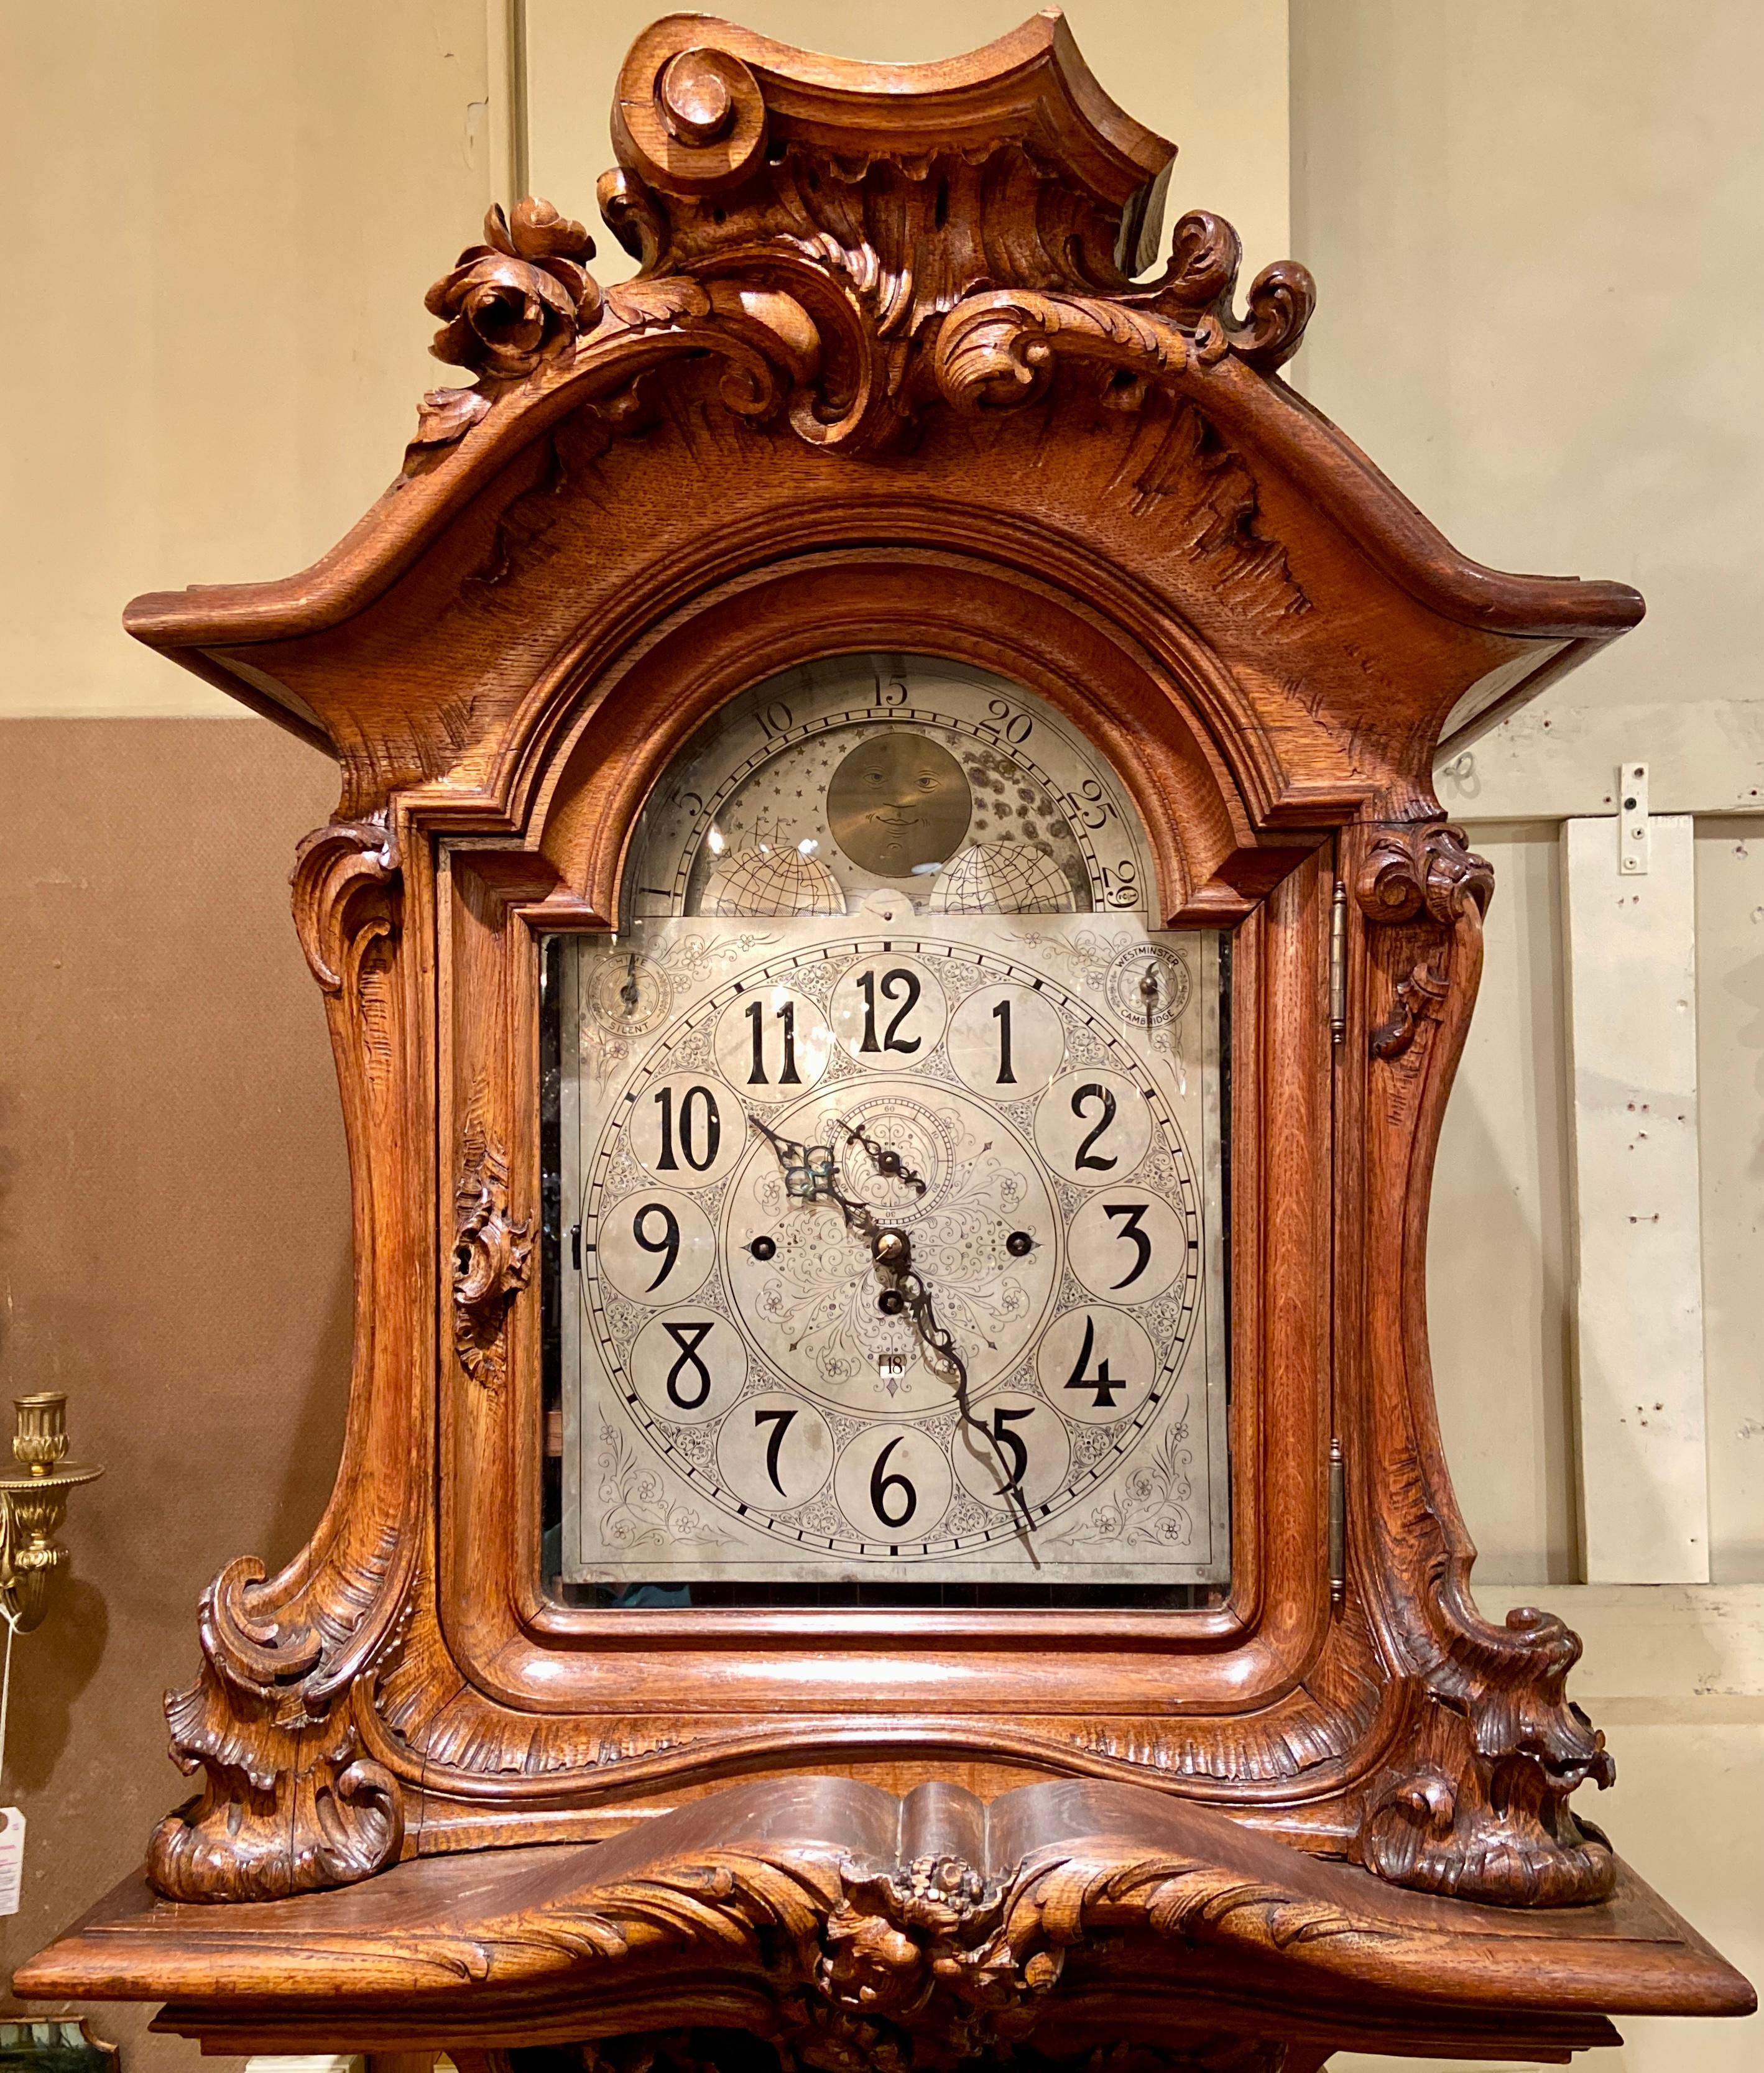 Spectacular Antique French Carved walnut master workmanship musical clock with the Cambridge Chimes (Westminster Chimes). Grand Size with intricate carving.